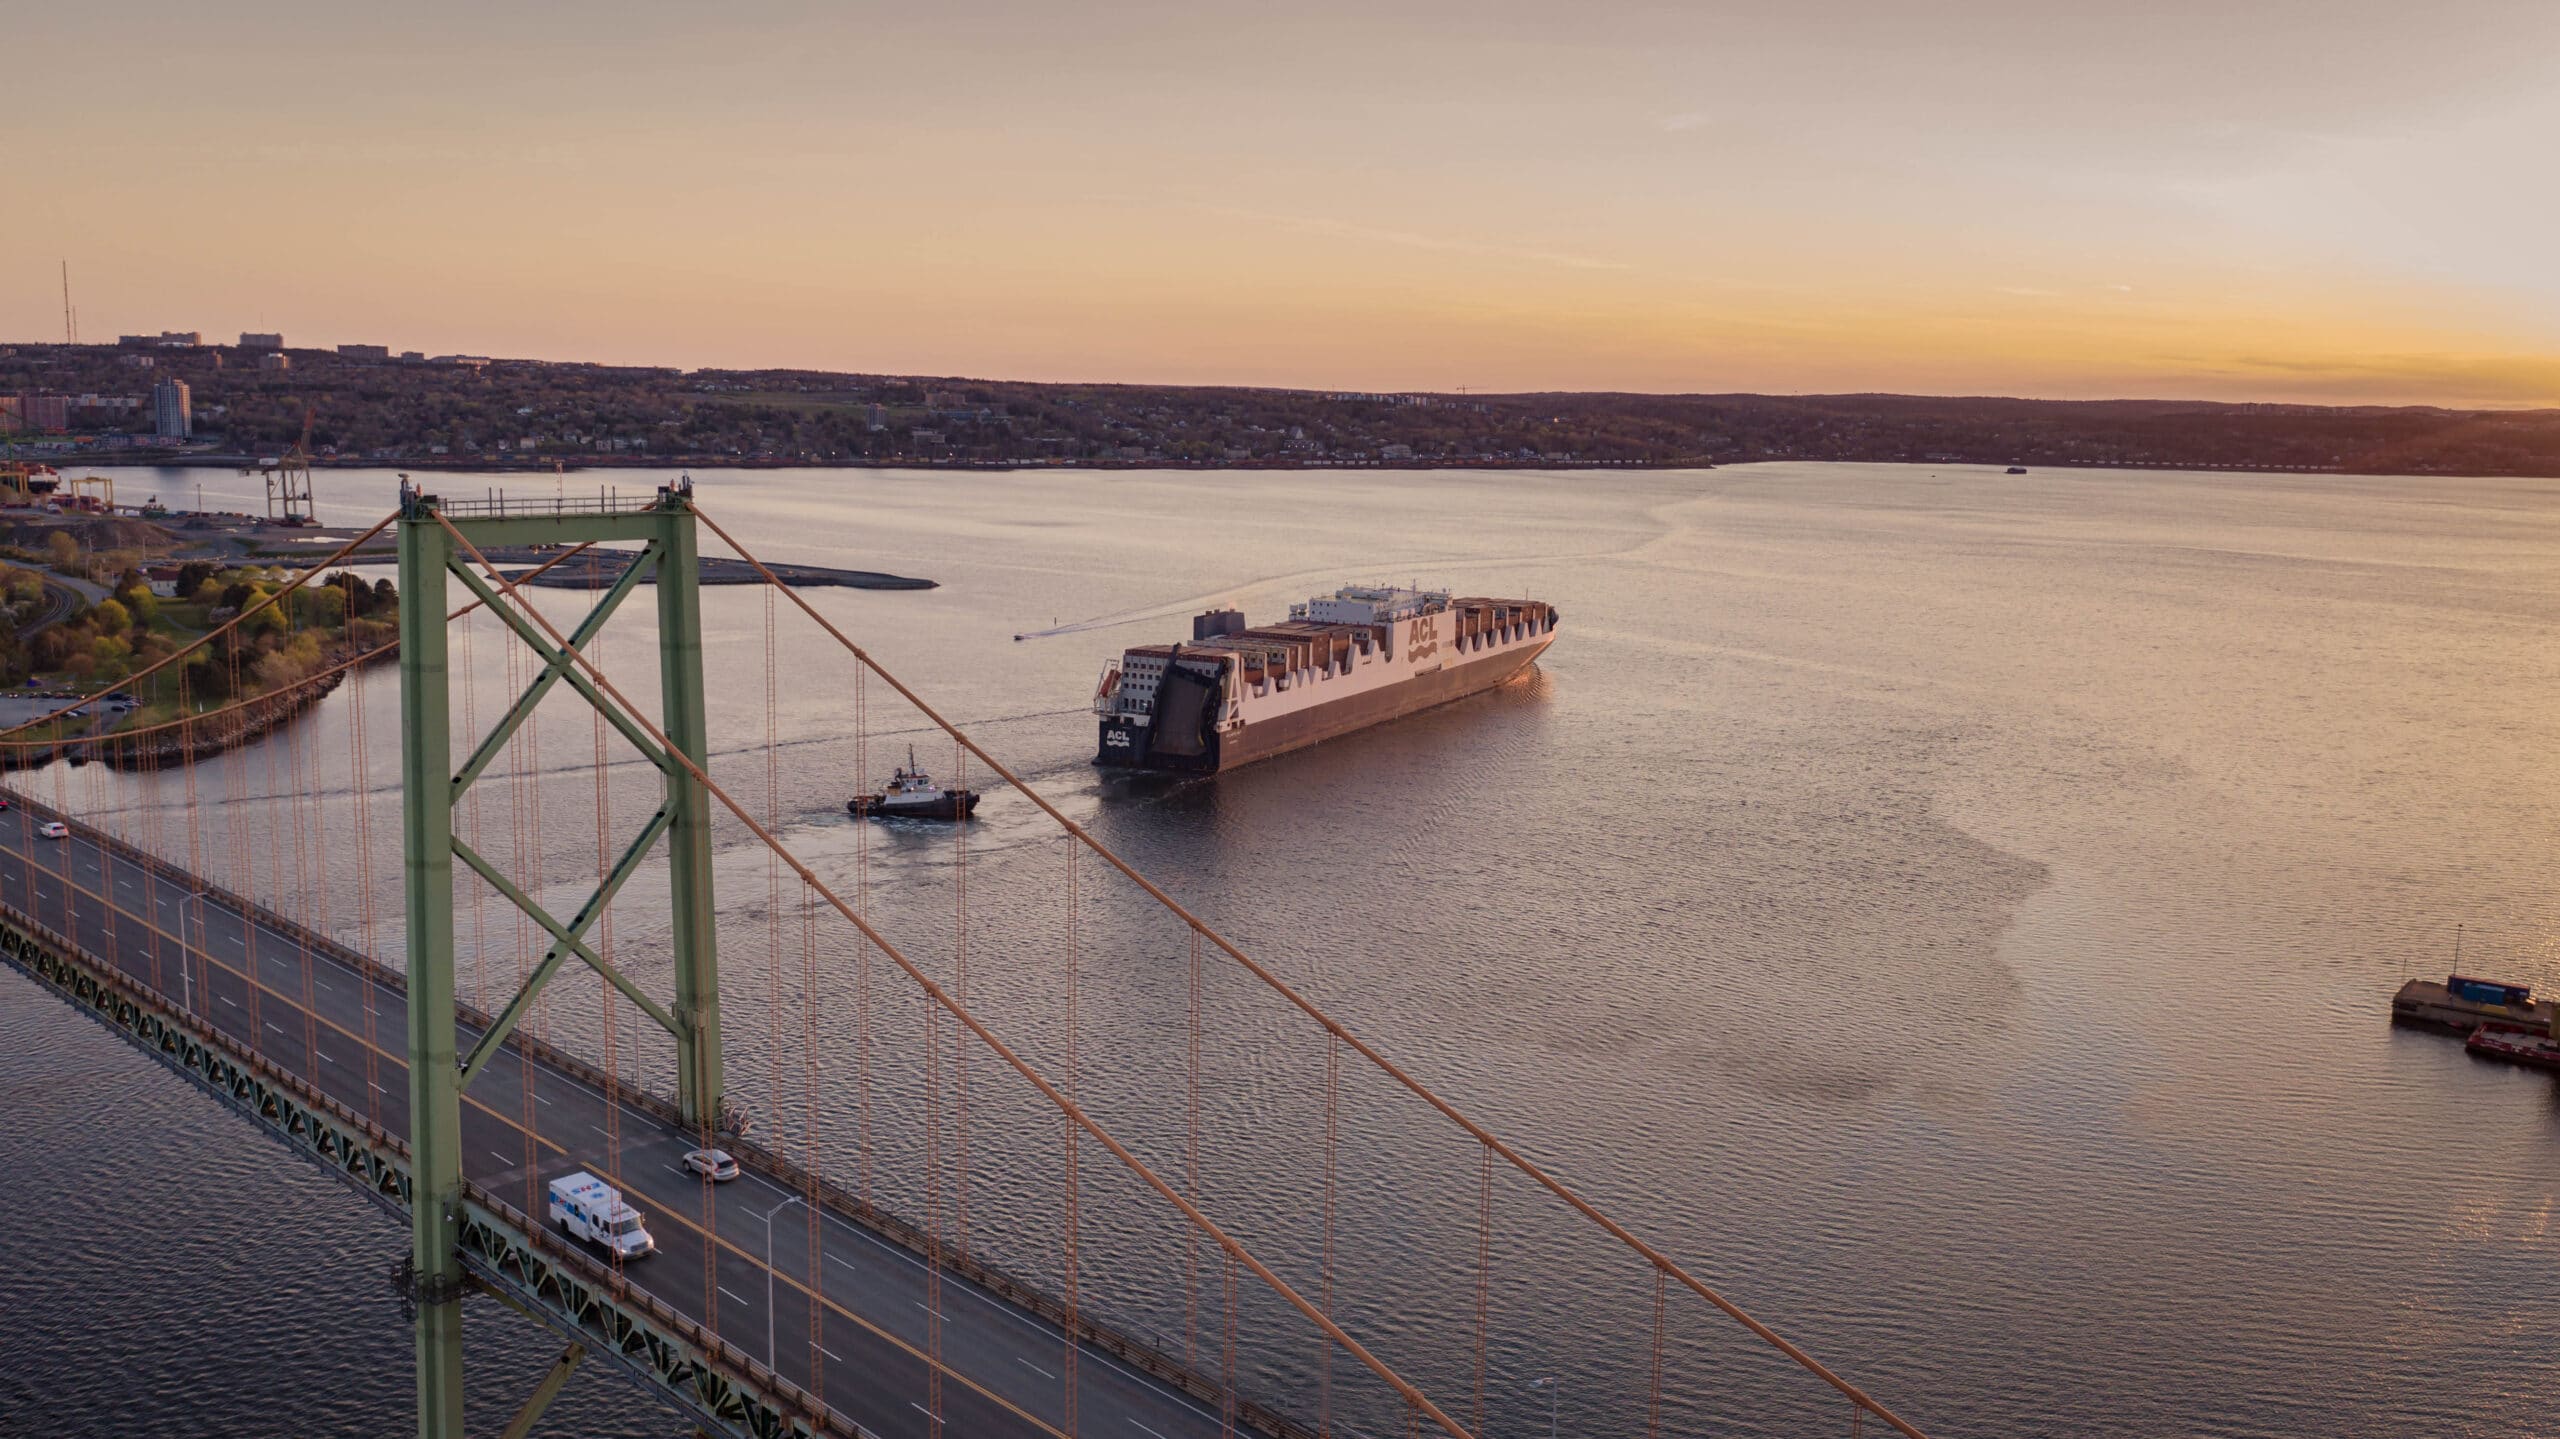 A container ship, accompanied by a tug boat, enters the Bedford Basin under the MacKay Bridge at sunset.